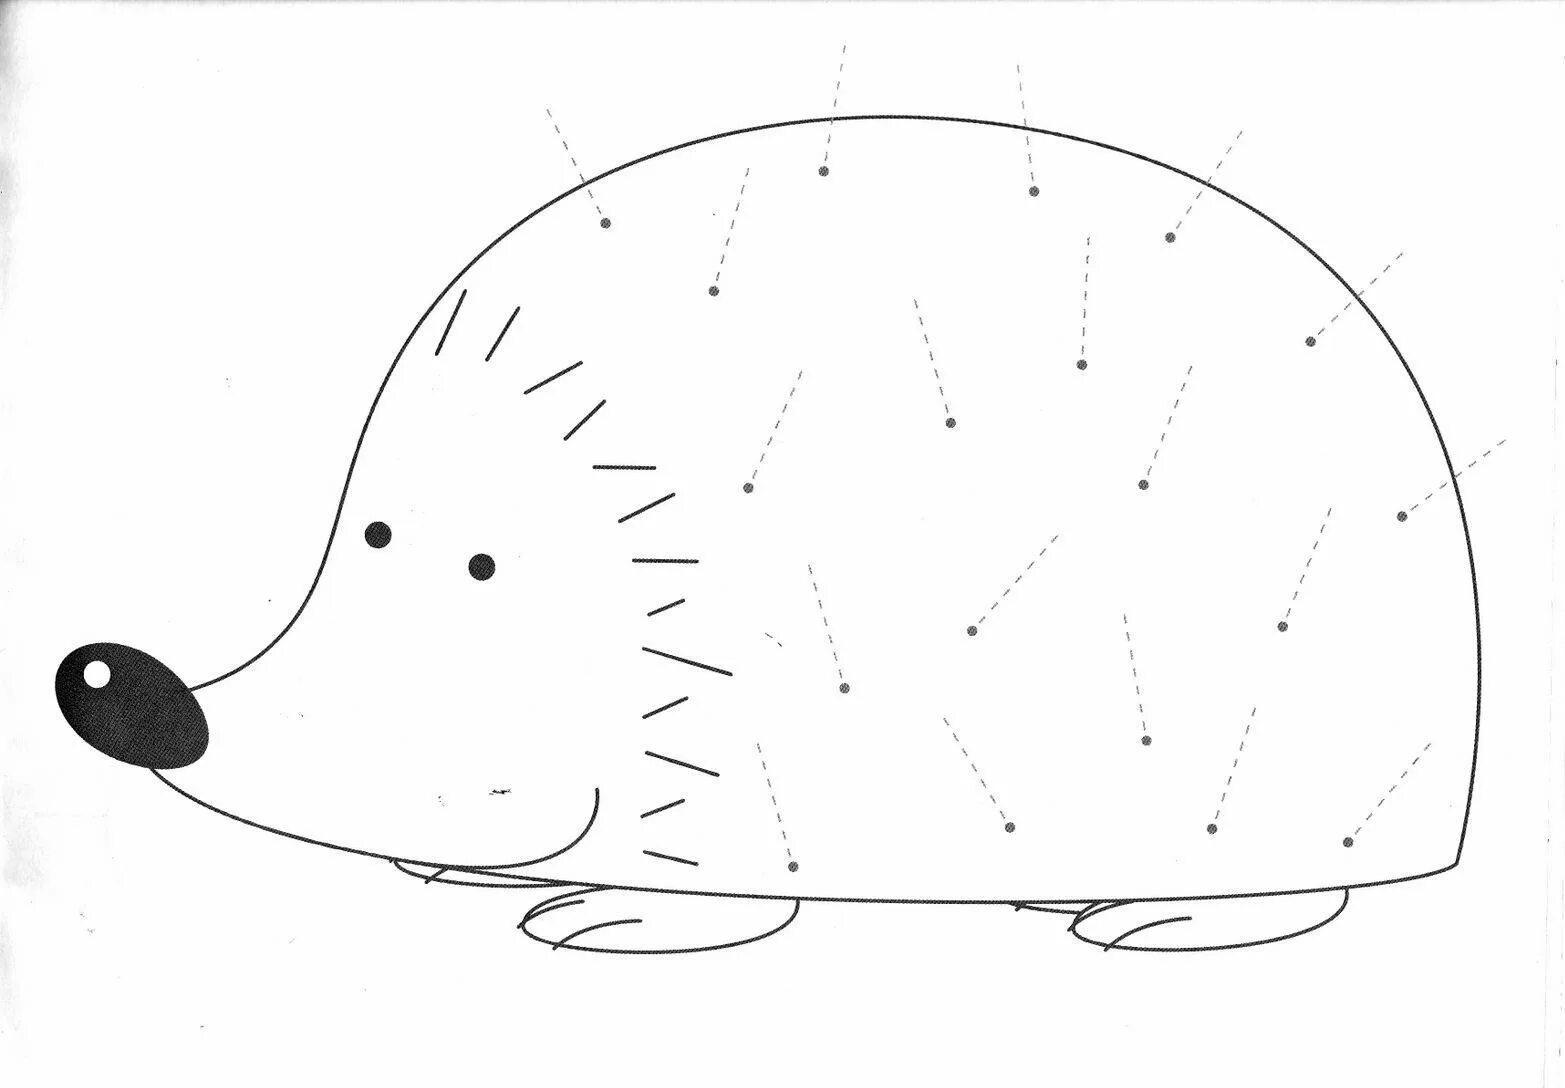 Hedgehog without spines #1